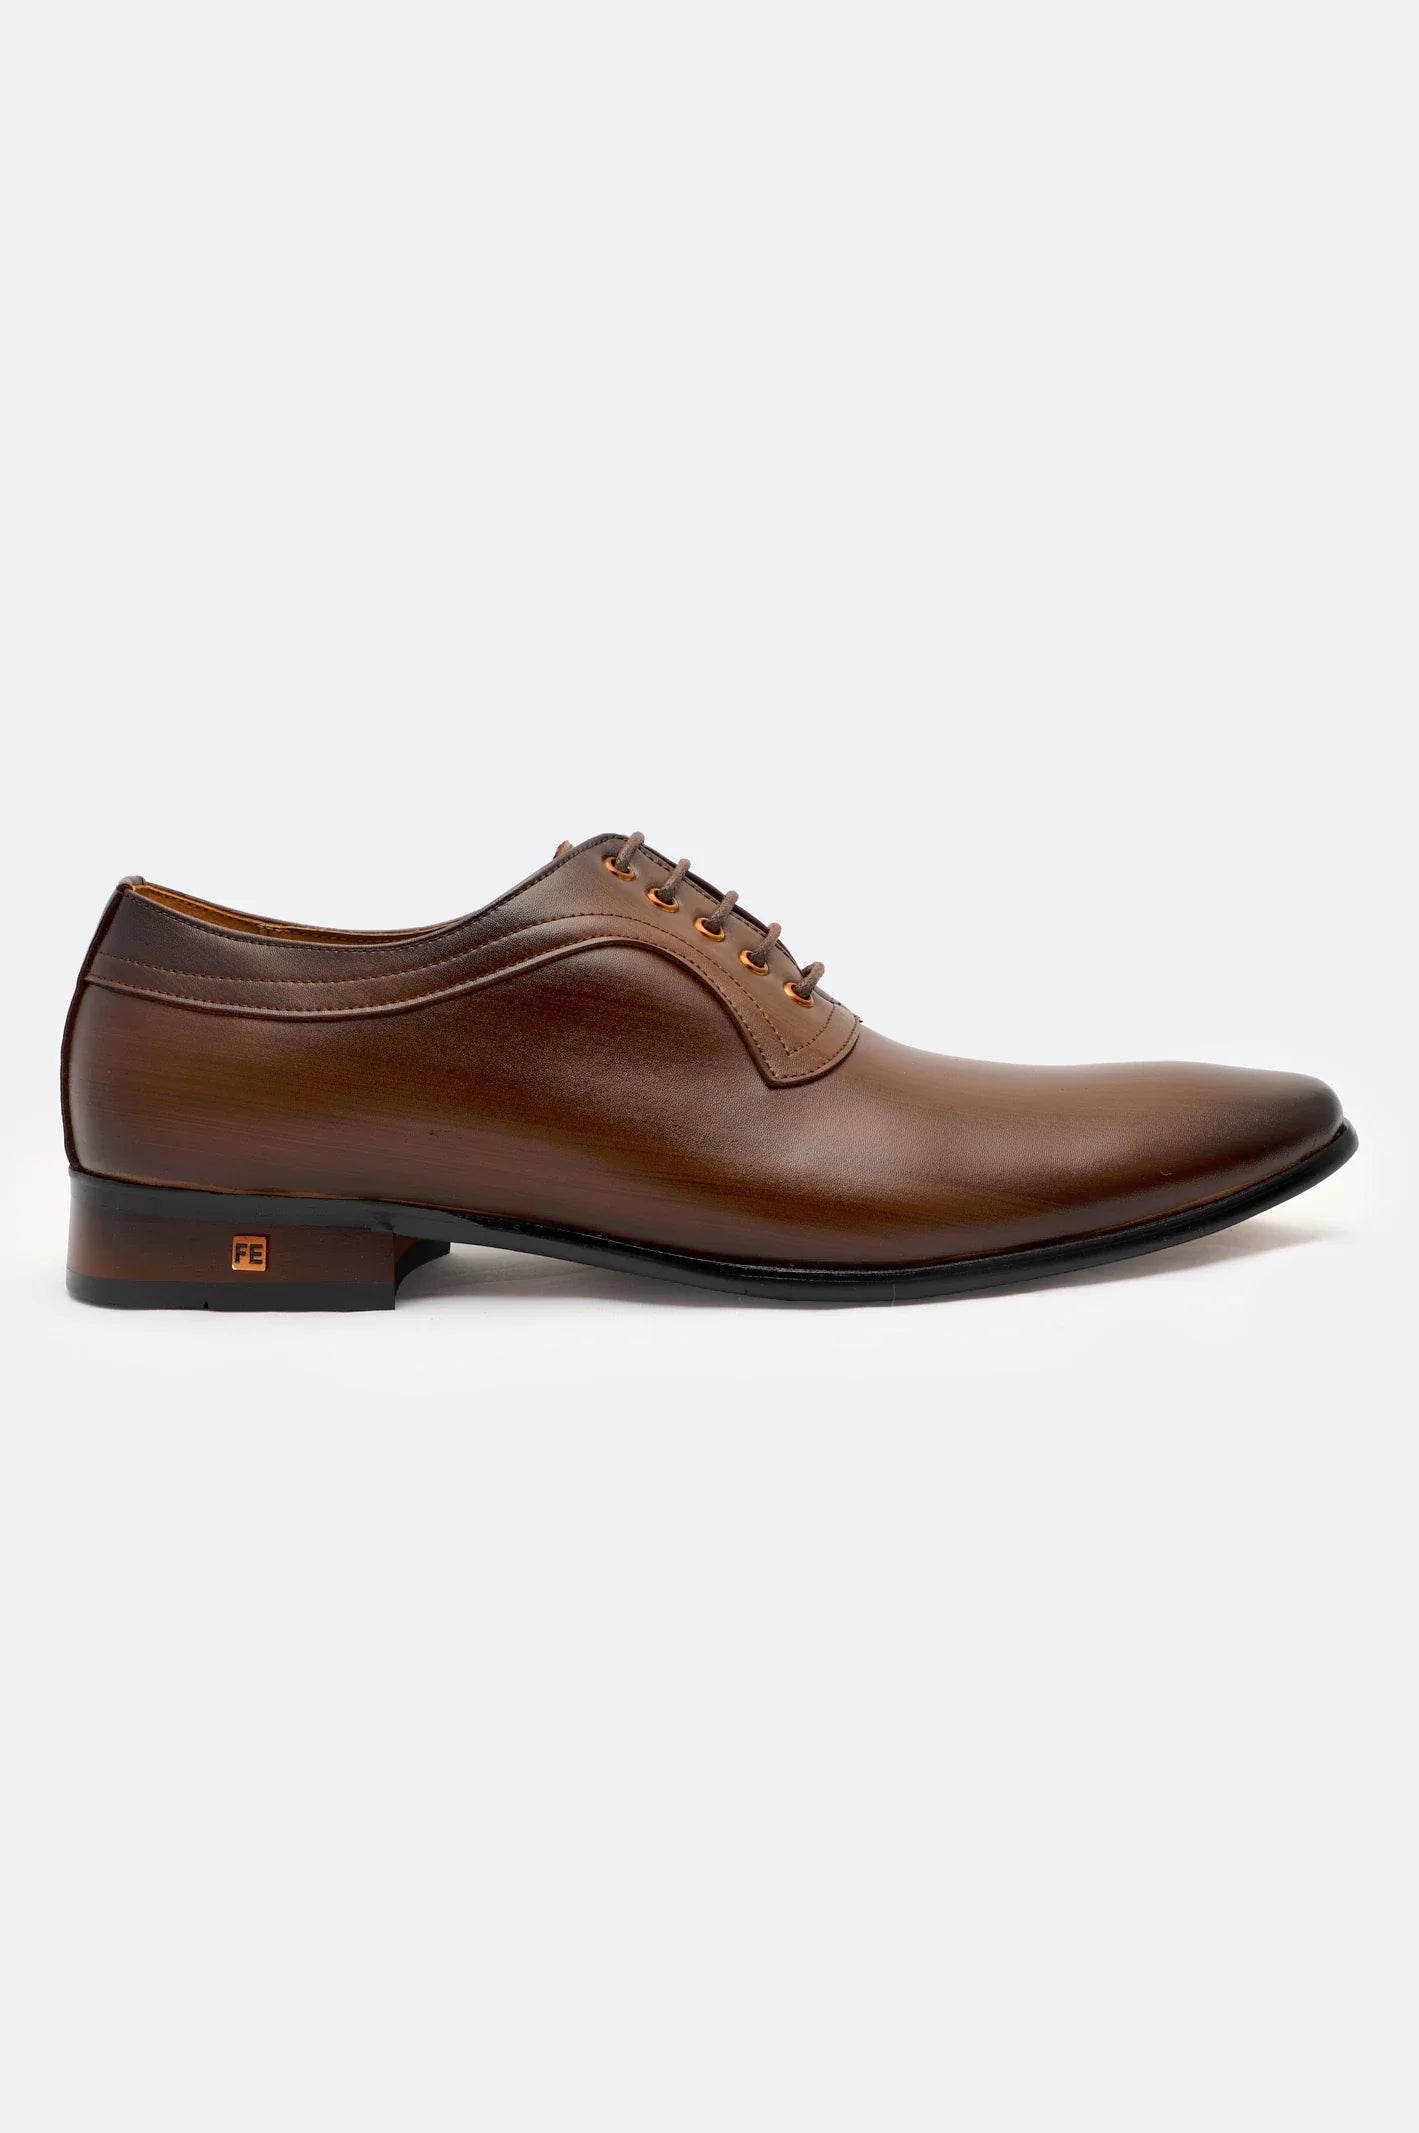 Brown Formal Oxford Shoes Premium Shoes From French Emporio By Diners